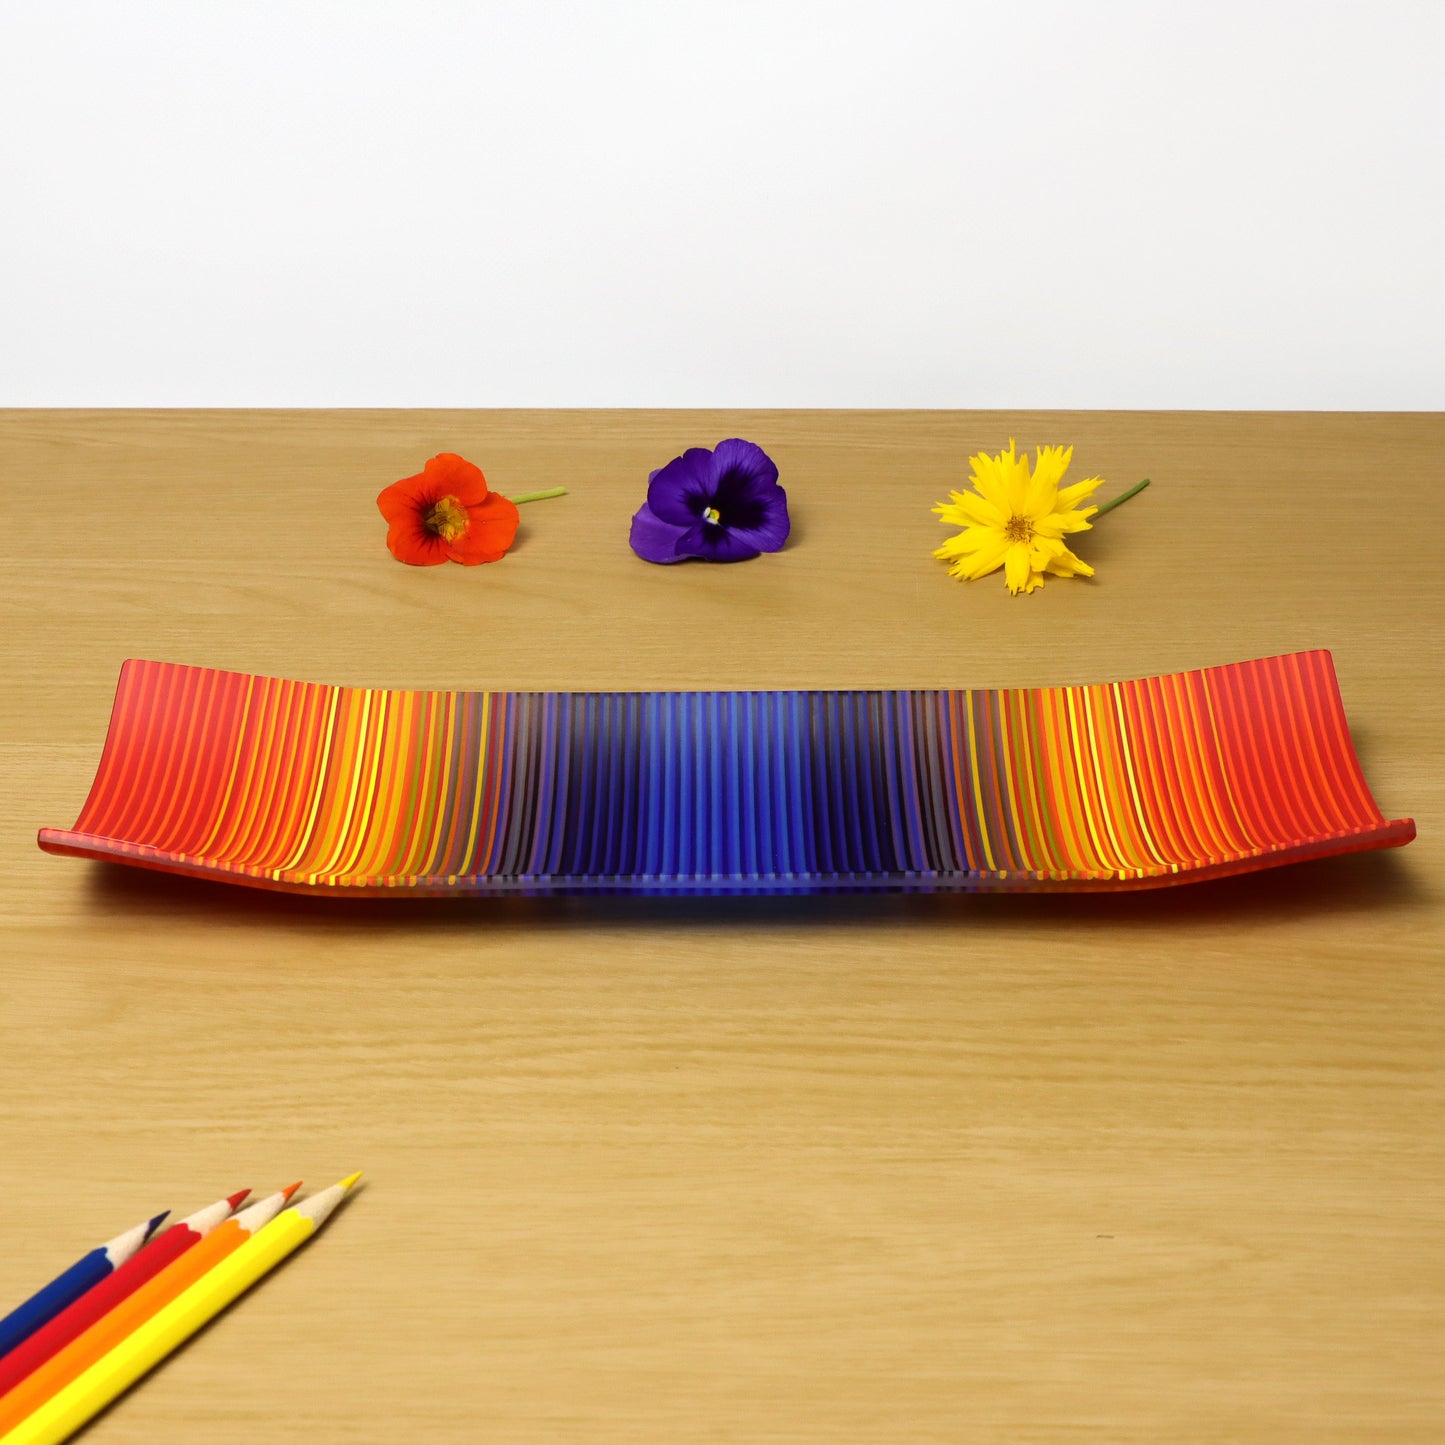 A ColourWave Glass fused glass plate, crafted in the UK, with a vibrant colour gradient. The rectangular plate features upturned corners and presents a bright blue centre that transitions into purple, yellow, and red waves of colour. The plate is displayed on a wooden surface, accompanied by a red poppy flower to the left, a purple pansy in the middle, and a yellow daisy to the right. Below the display are a set of complementary coloured pencils.